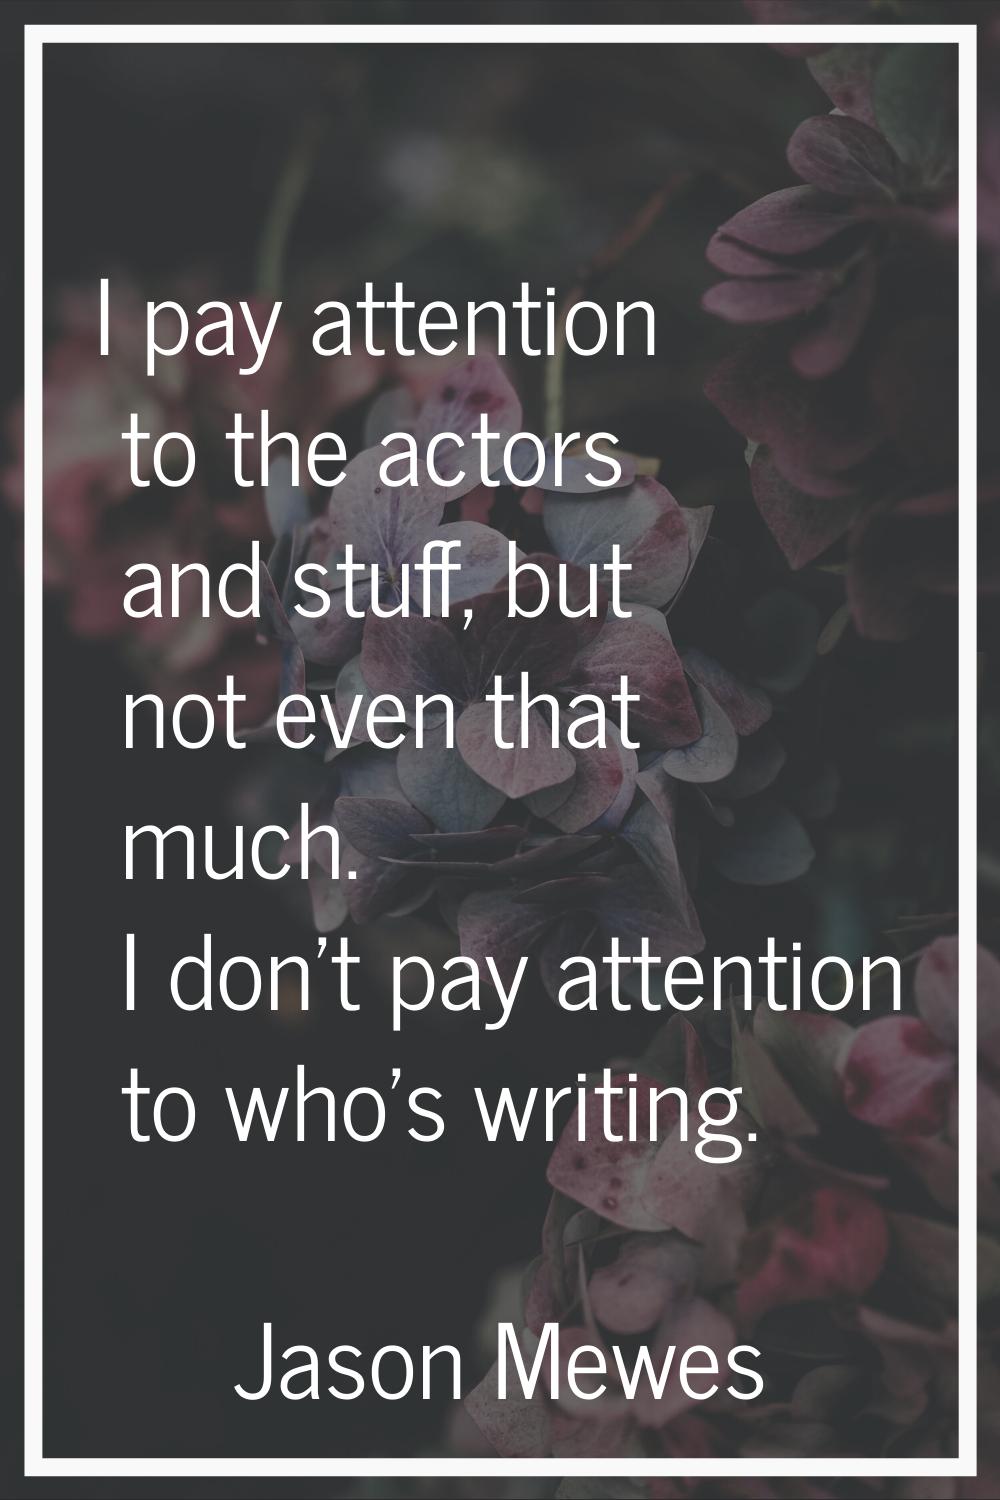 I pay attention to the actors and stuff, but not even that much. I don't pay attention to who's wri